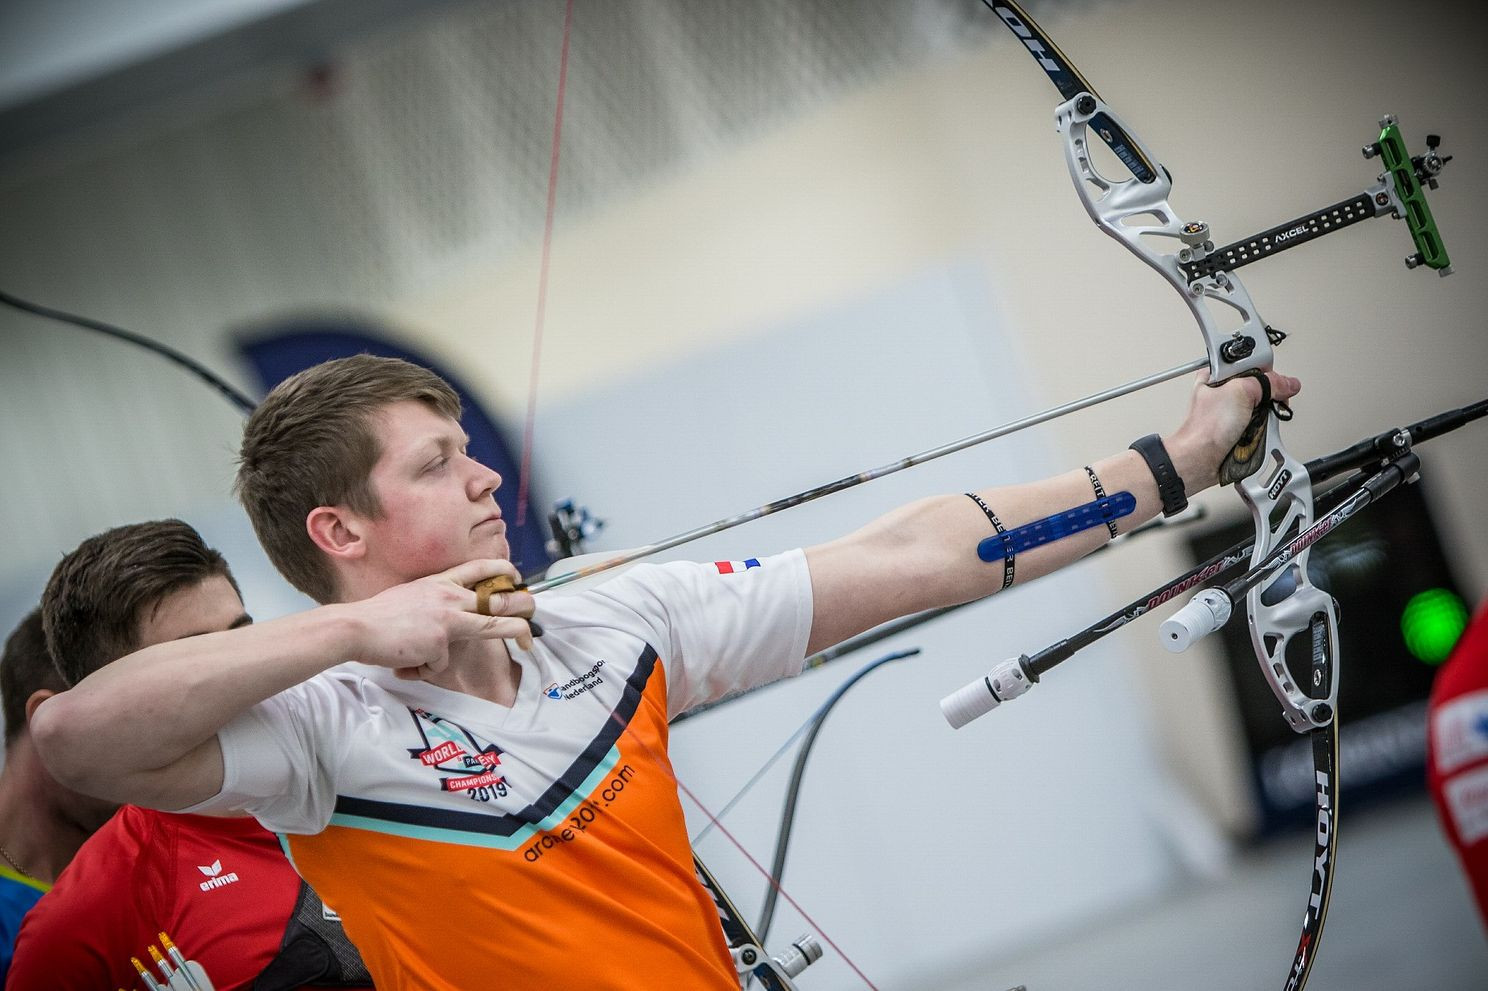 Sjef van den Berg also broke a European record in the recurve event ©Getty Images